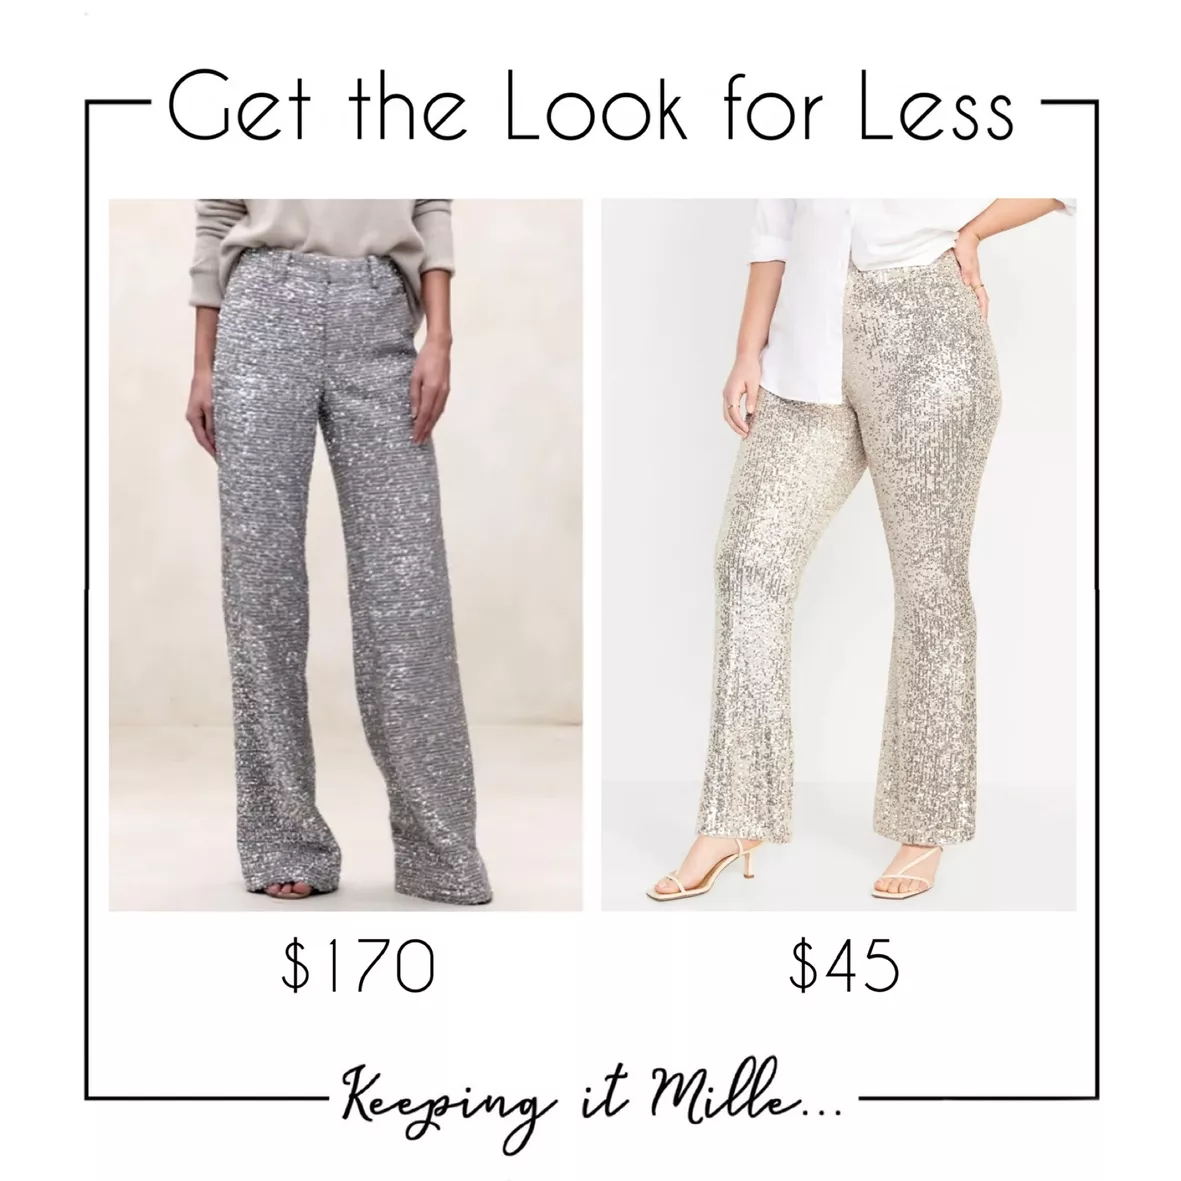 How to Make Sequin Pants Look Cool